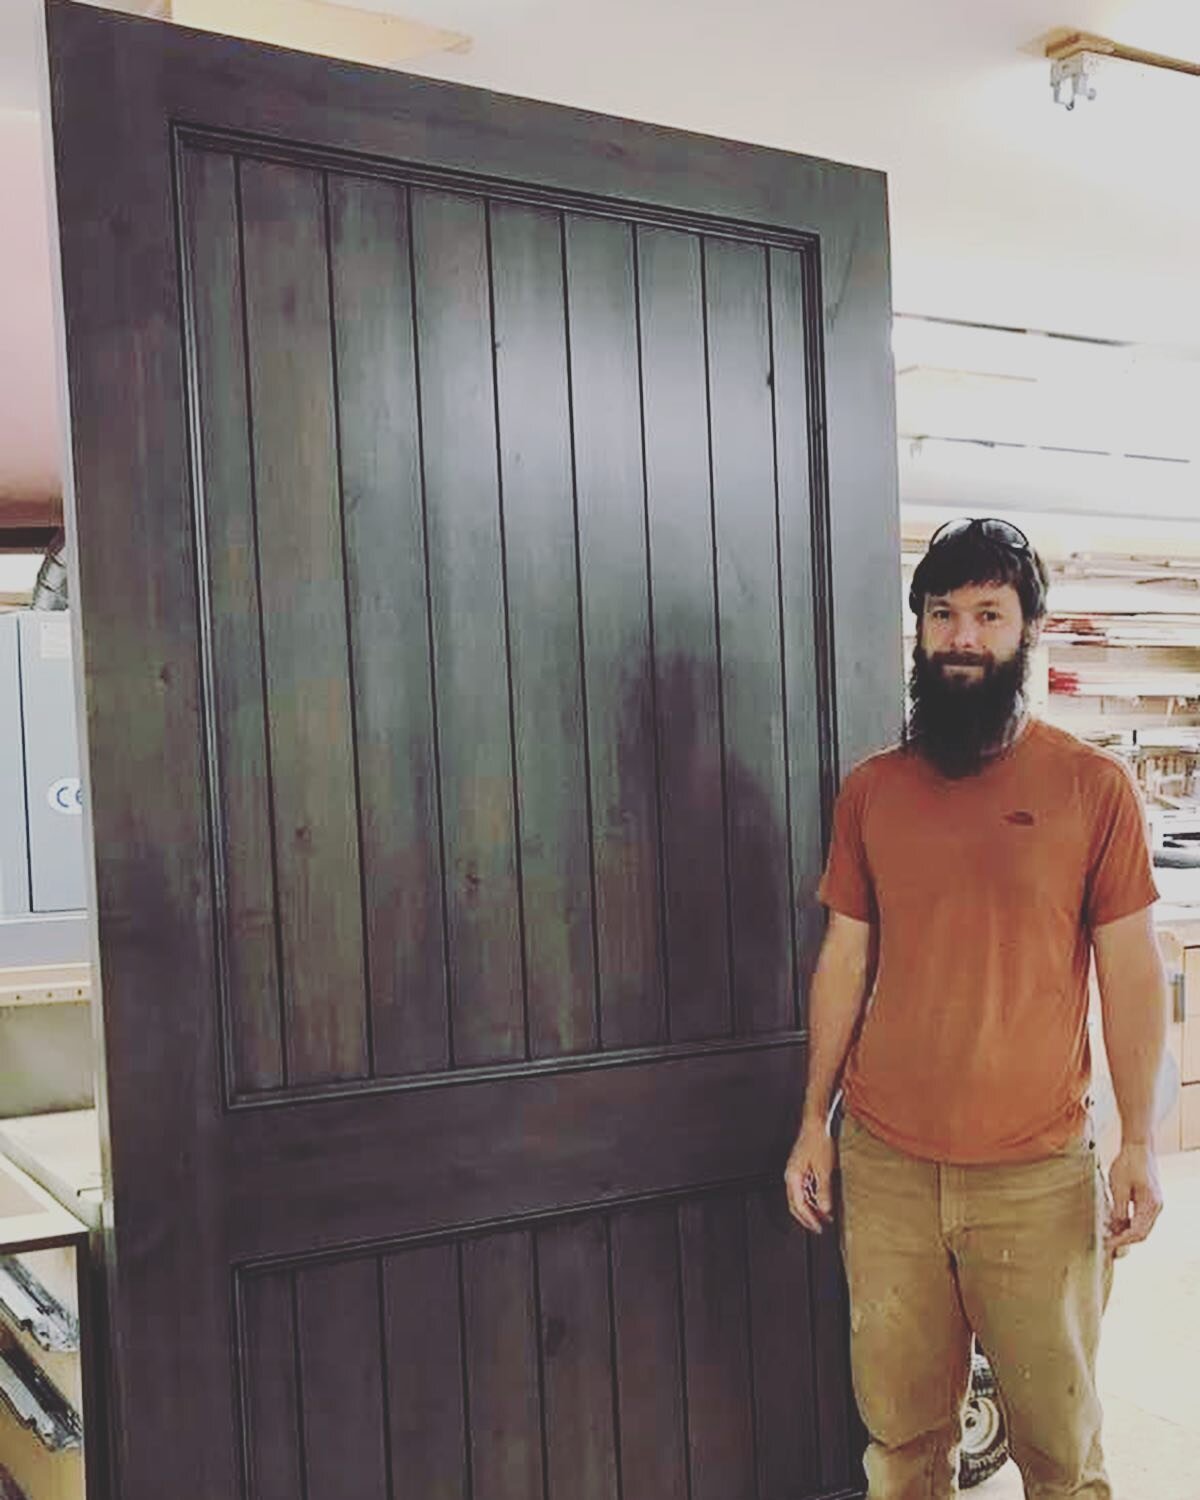 Big door day! This beauty was a beast to move around once assembled...🥵
Complete with a custom @rockymountainhardware track.
.
.
.
#barndoors #slidingdoors